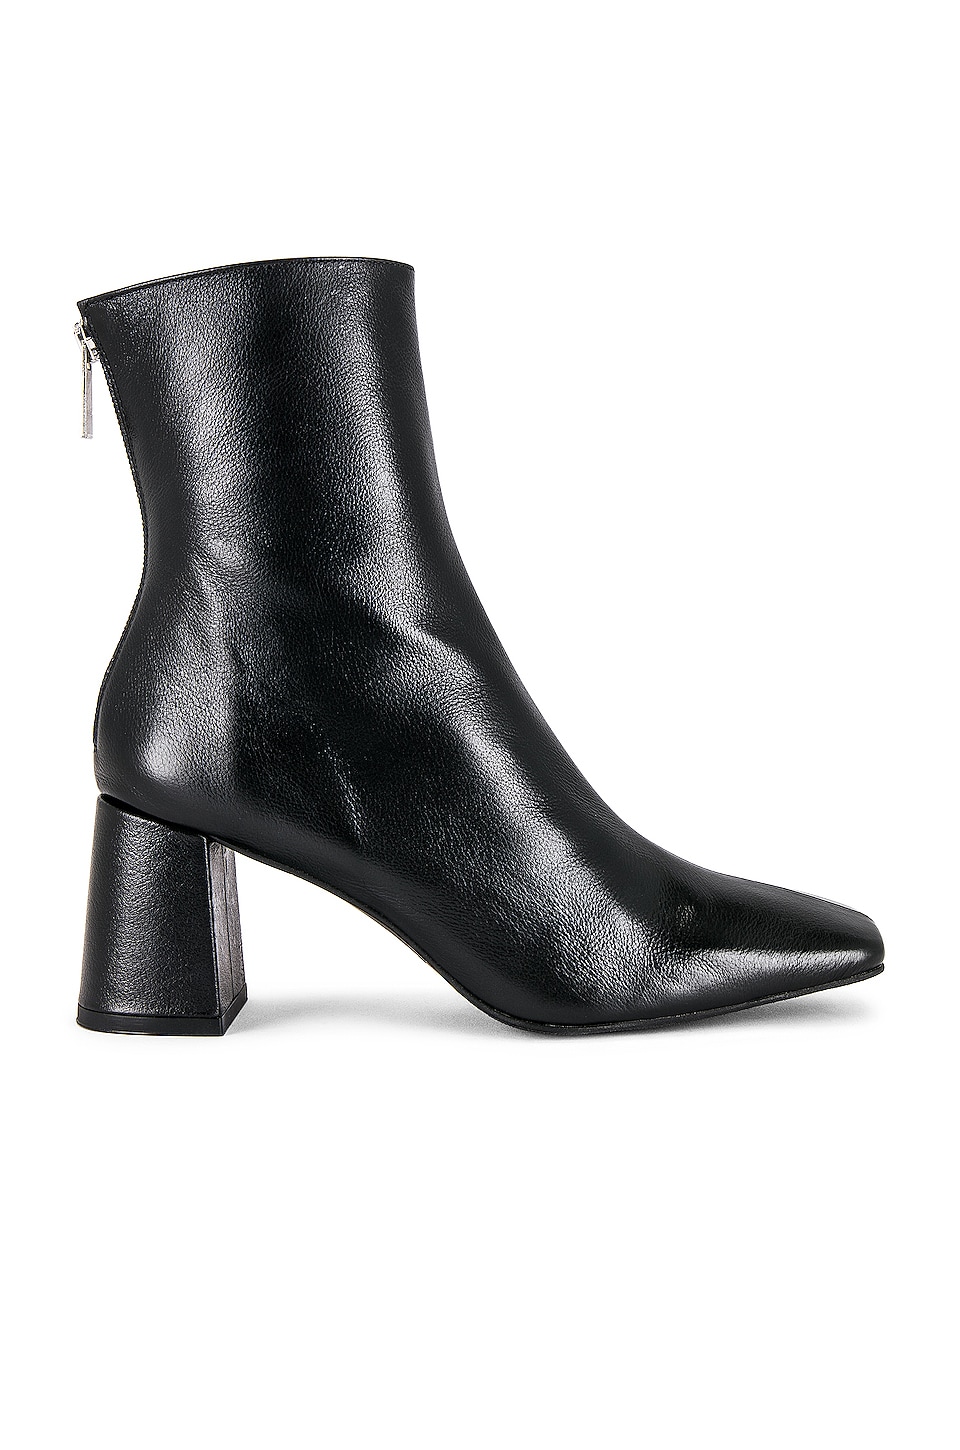 INTENTIONALLY BLANK Tabatha Bootie in Black | REVOLVE